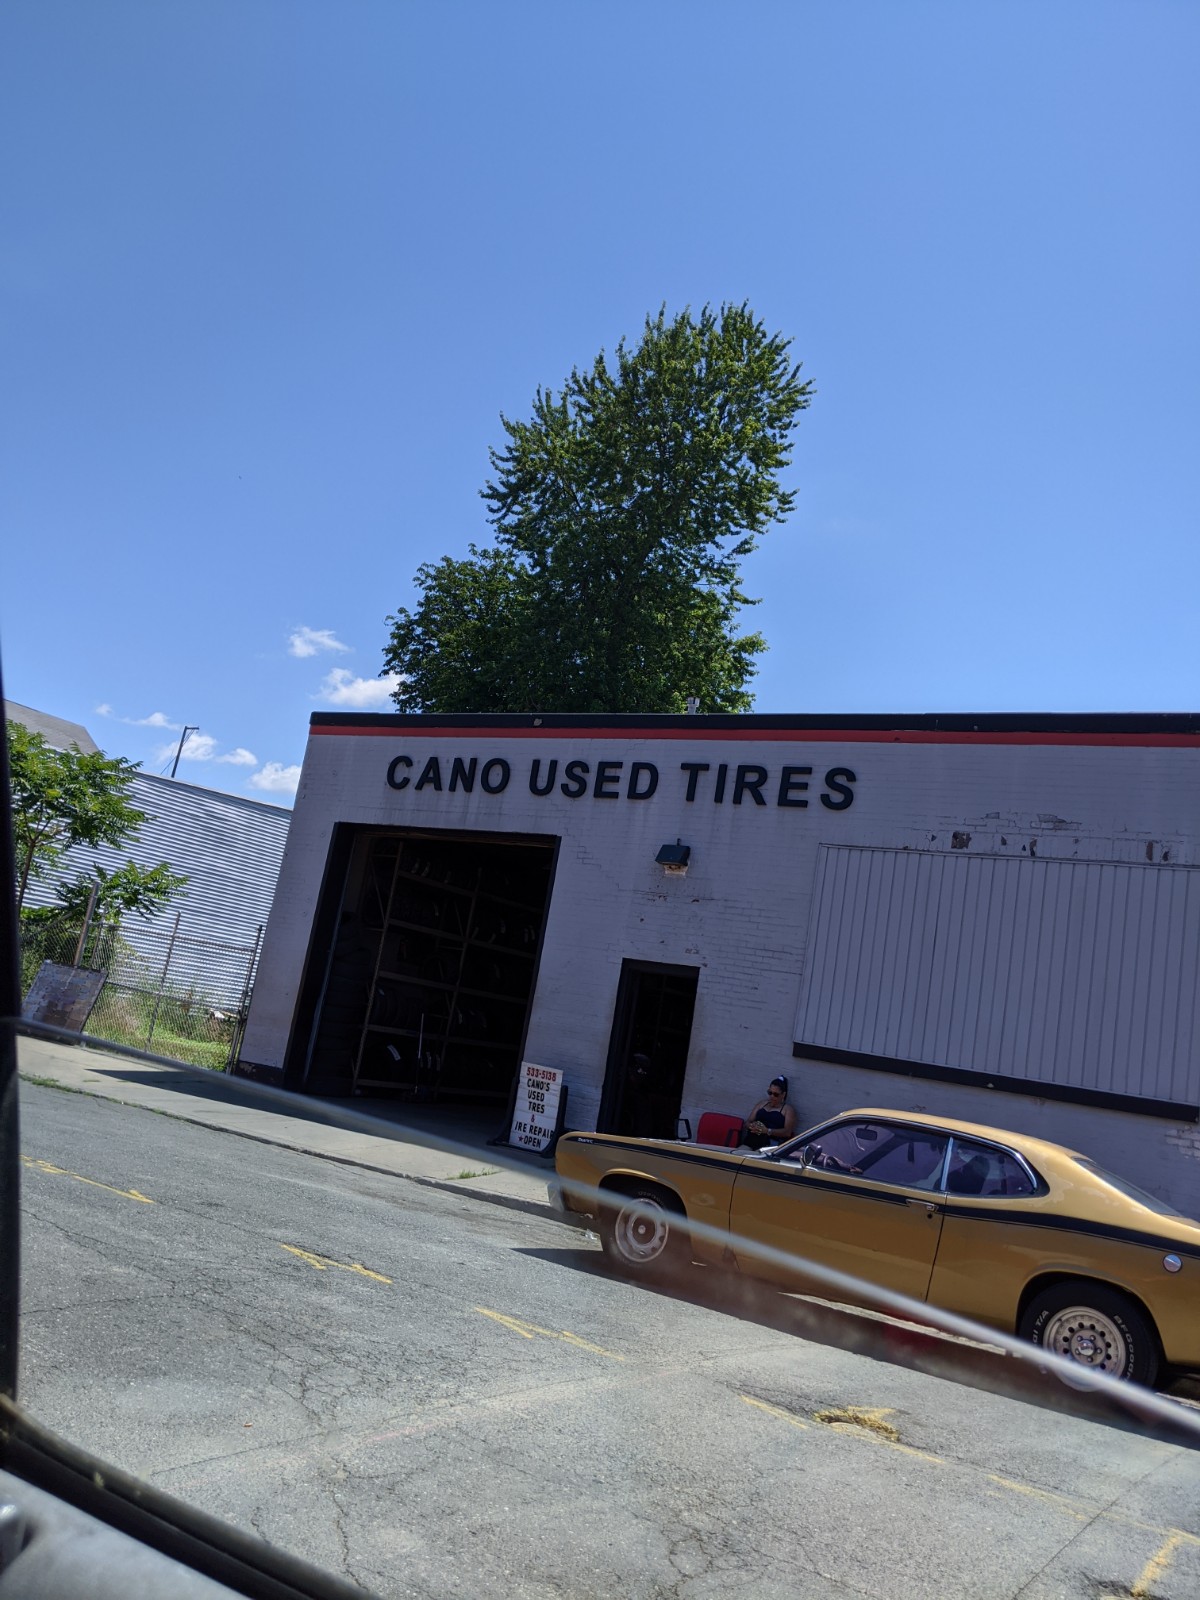 Cano Used Tires